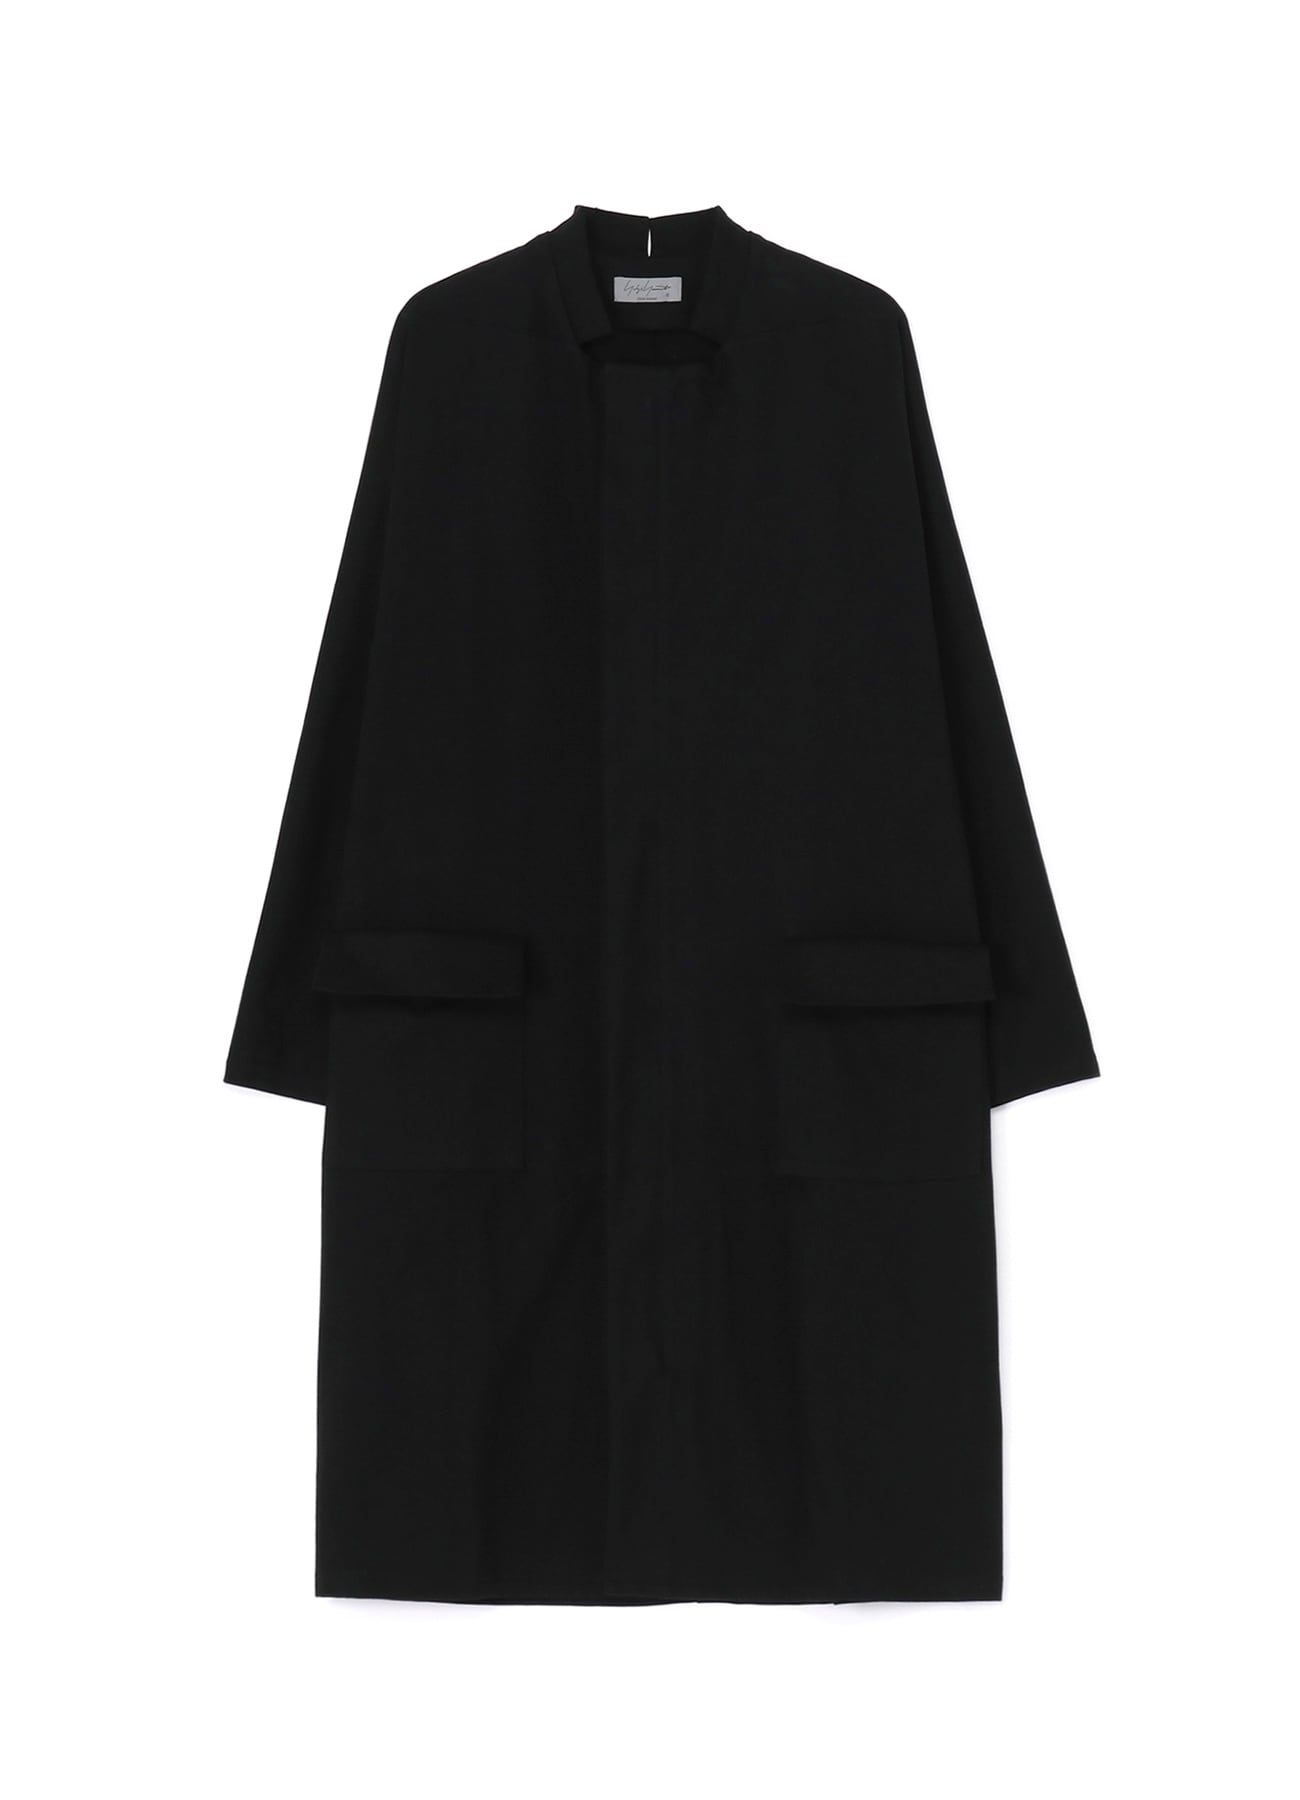 New Arrival | [Official] THE SHOP YOHJI YAMAMOTO (2/15 page)